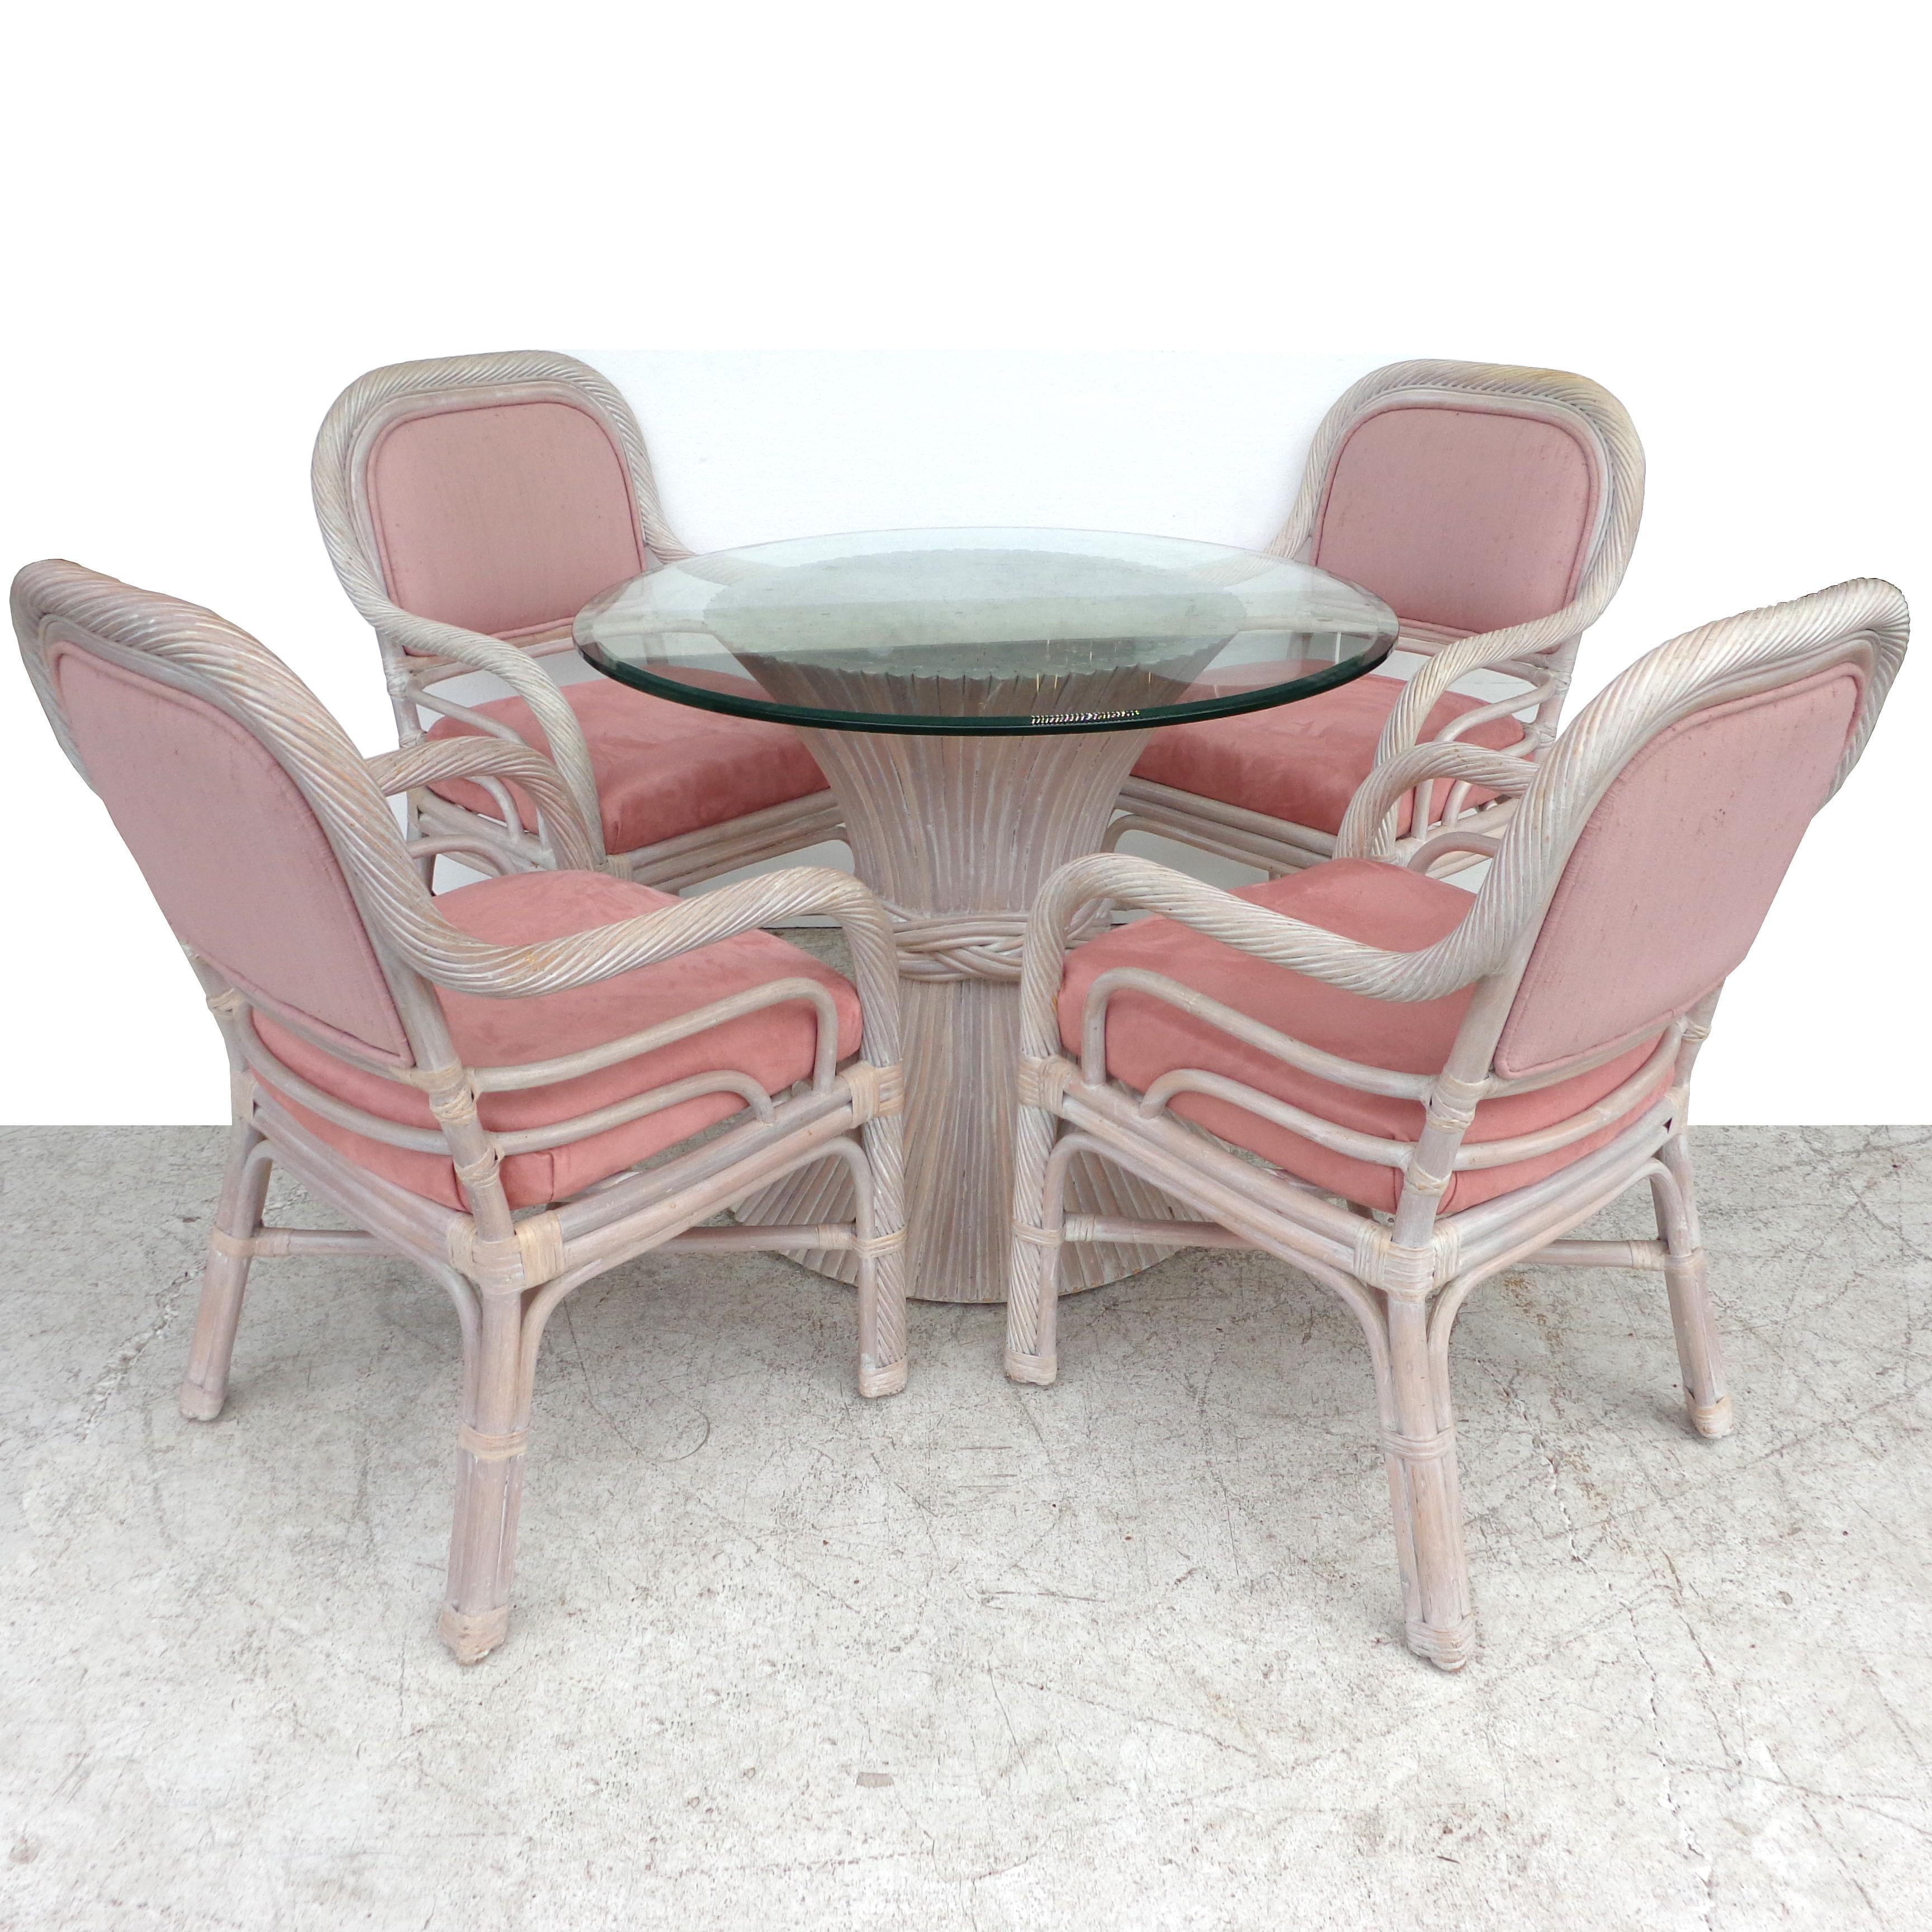 McGuire Dining Set

Featuring the classic wheat sheath dining table and 4 chairs.
The chairs are upholstered in a rich pink silk blend with a complimentary velour seat.
Chairs: 21.25